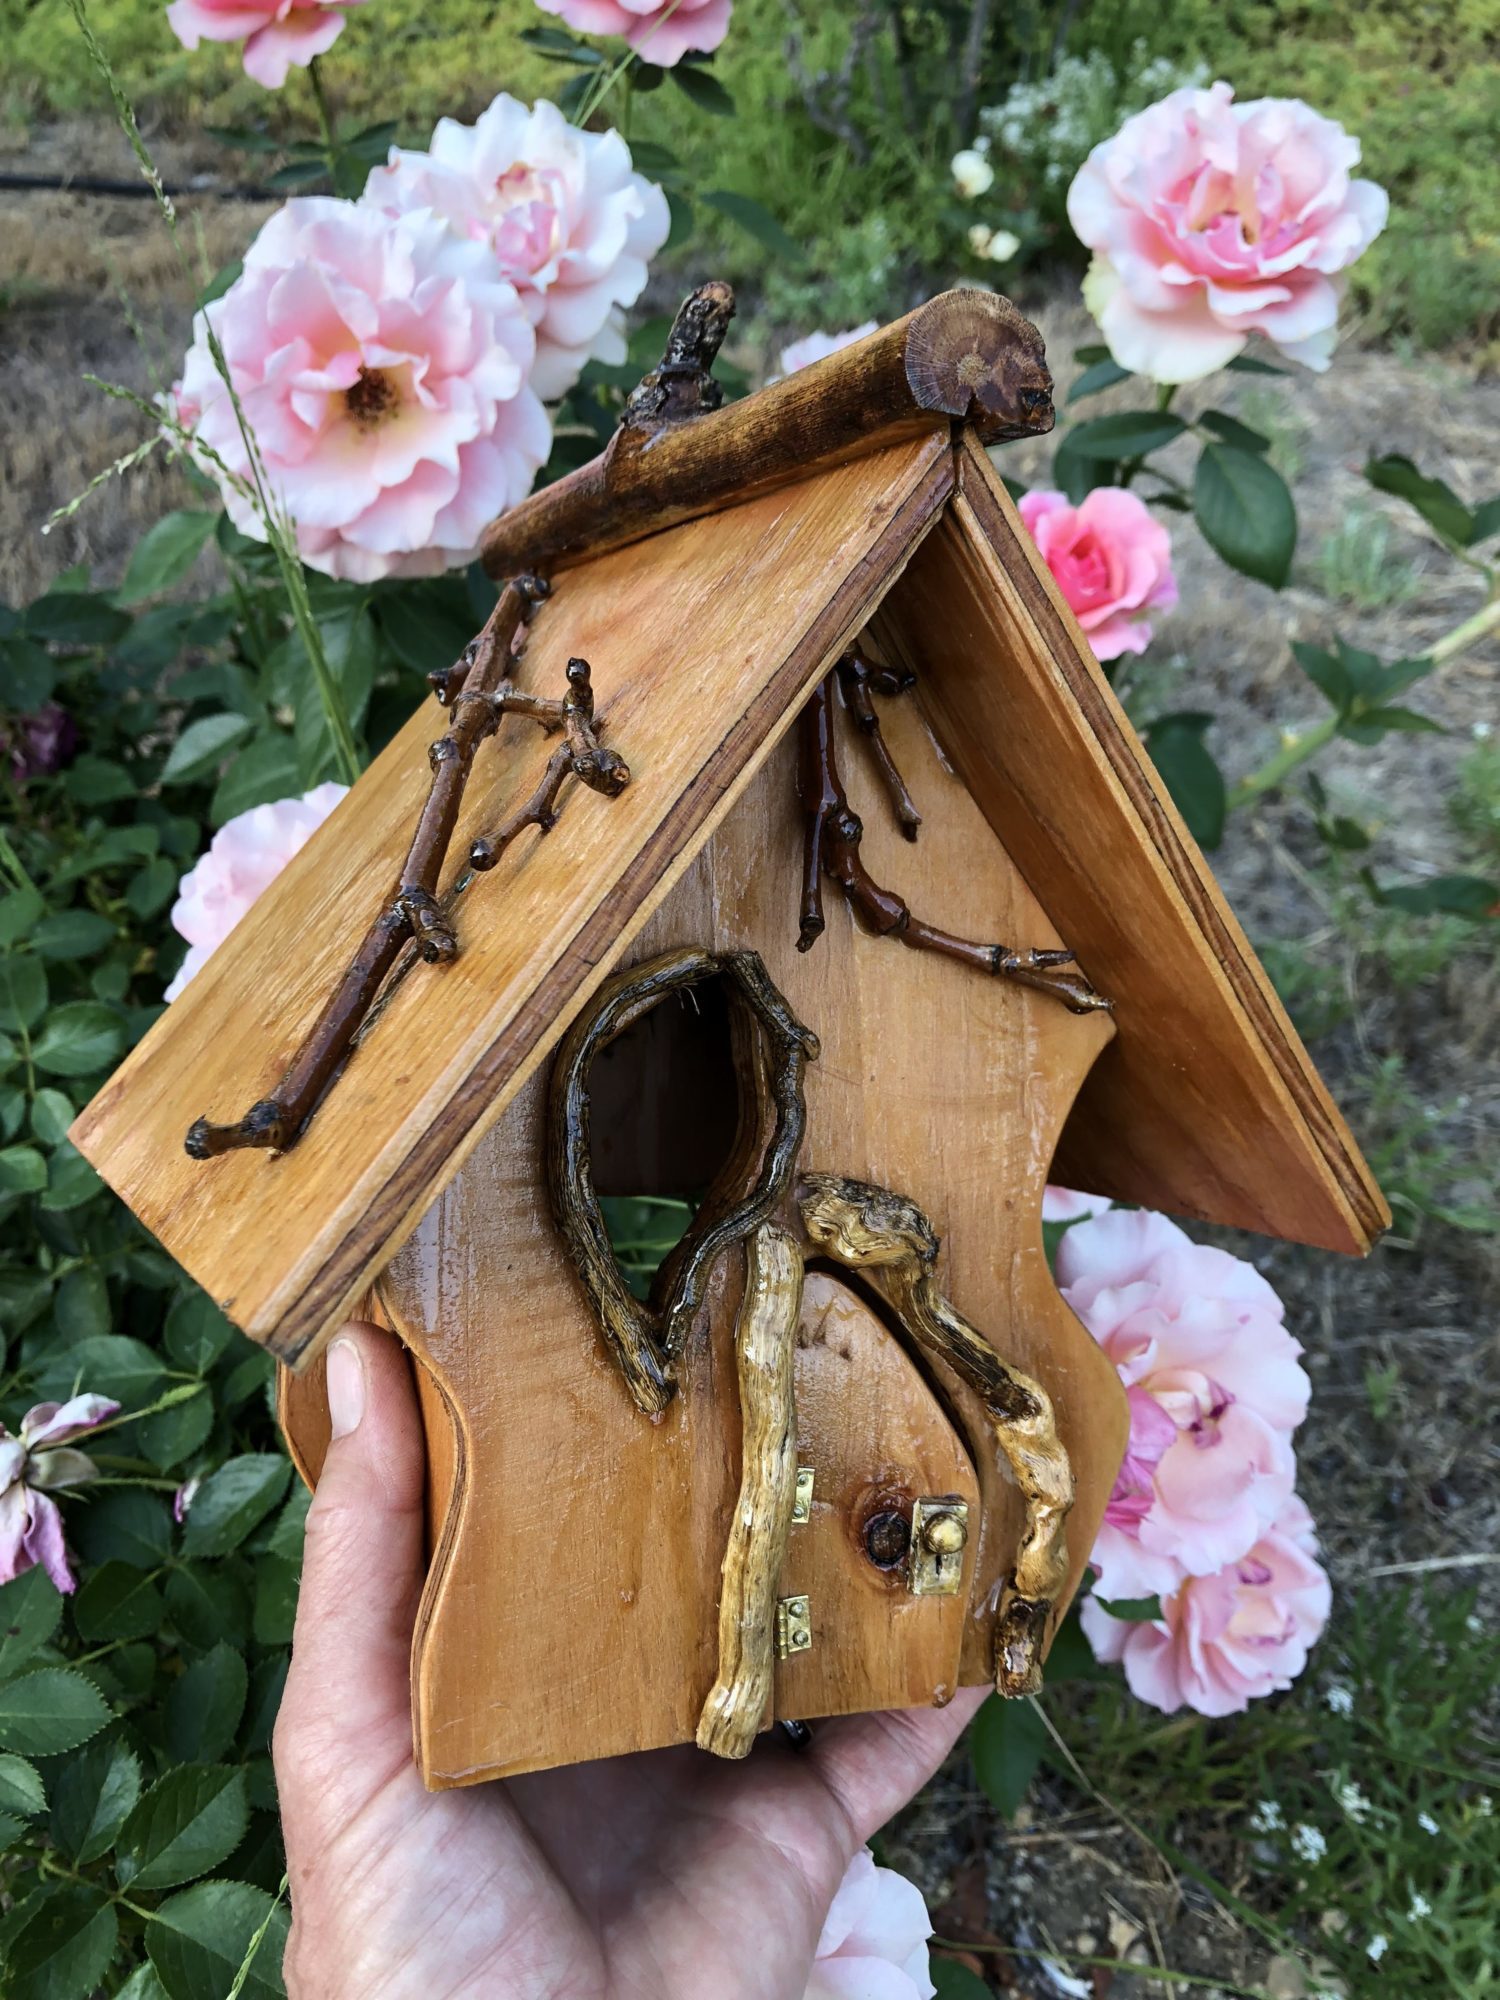 Funky Fairy House by Sprouted Dreams (1)